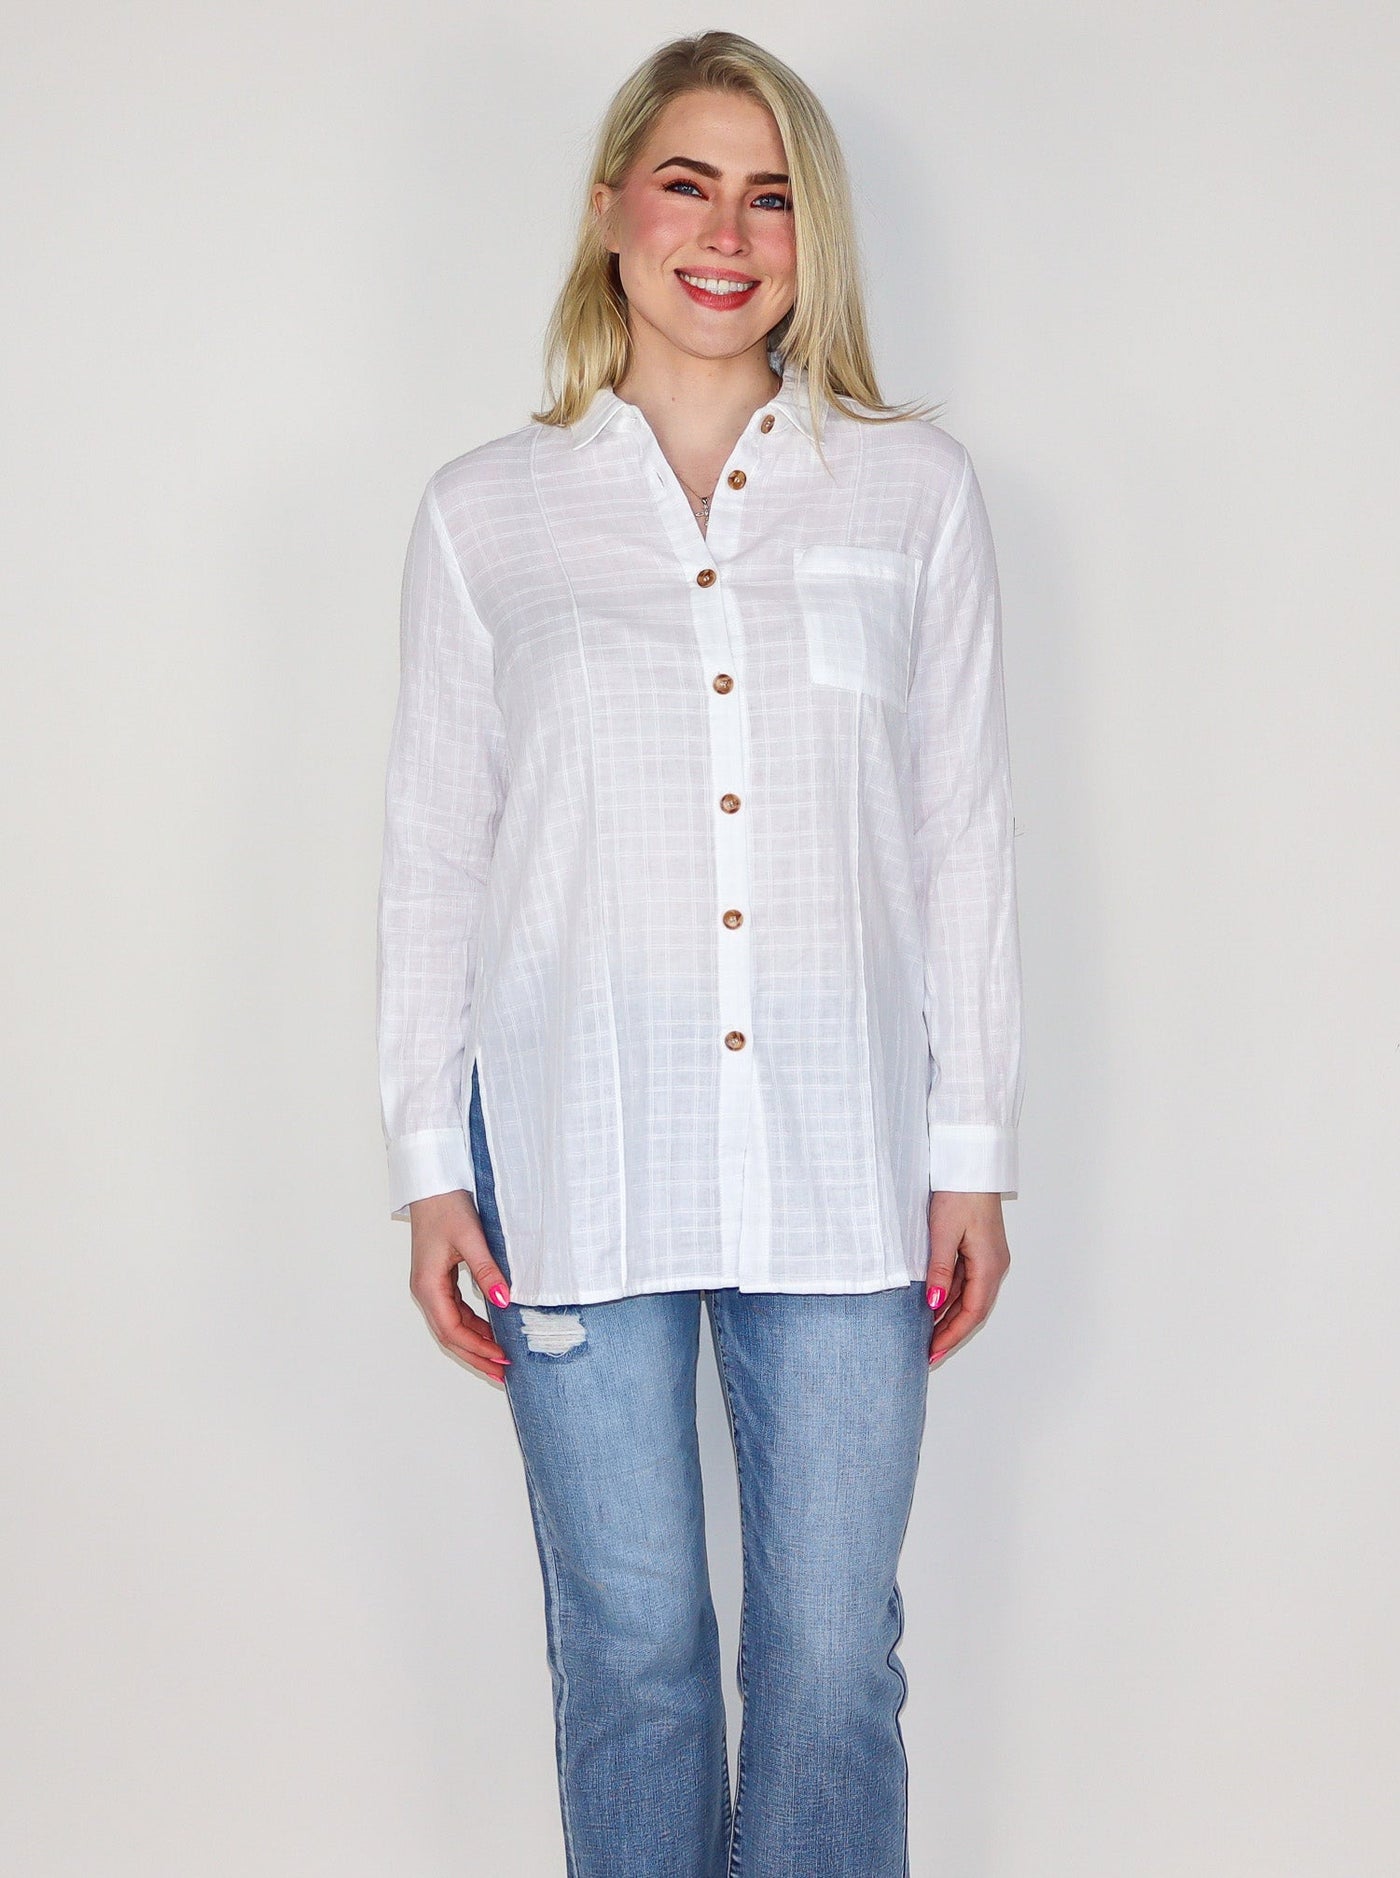 Model is wearing a light weight white textured button up with brown buttons. Top is worn with blue jeans. 